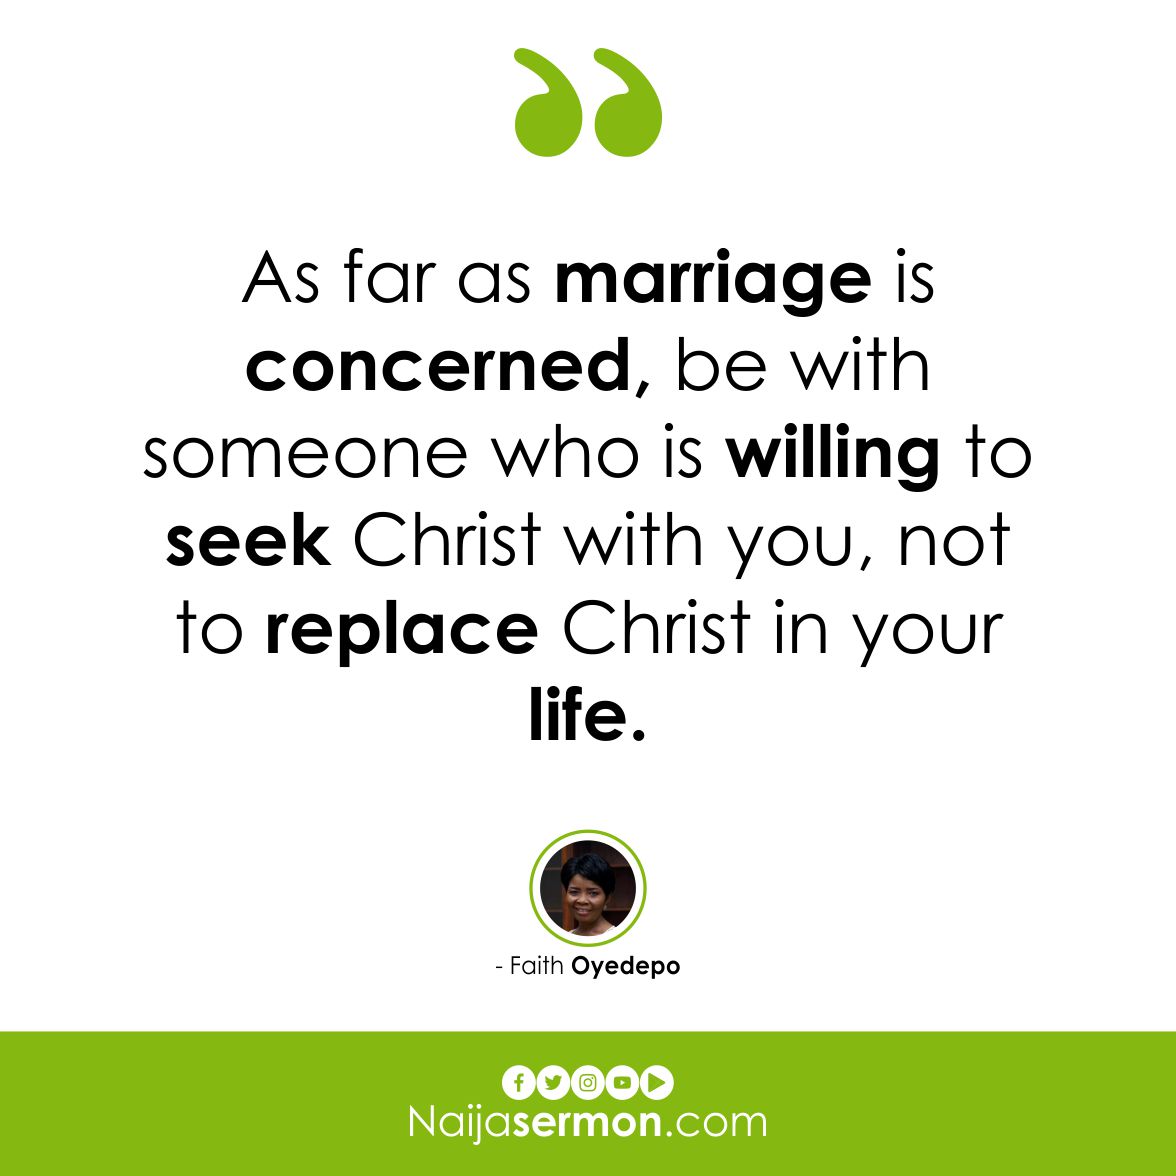 Quote of the Day by Faith Oyedepo 18